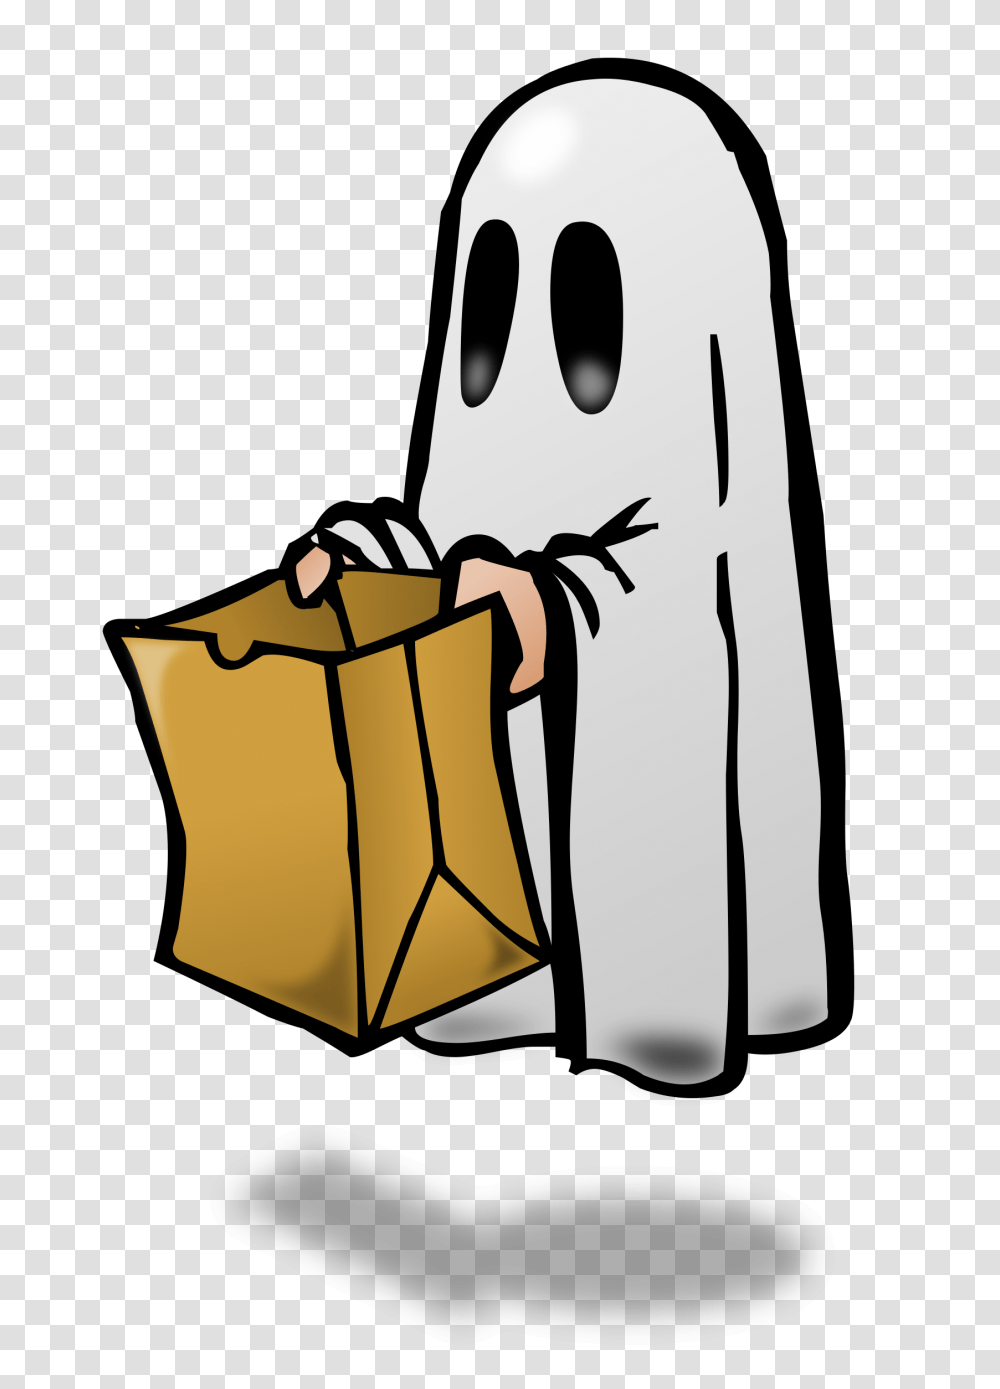 Image Result For Ghost Clip Art Clip Art And Gifs, Bag, Shopping Bag, Apparel Transparent Png